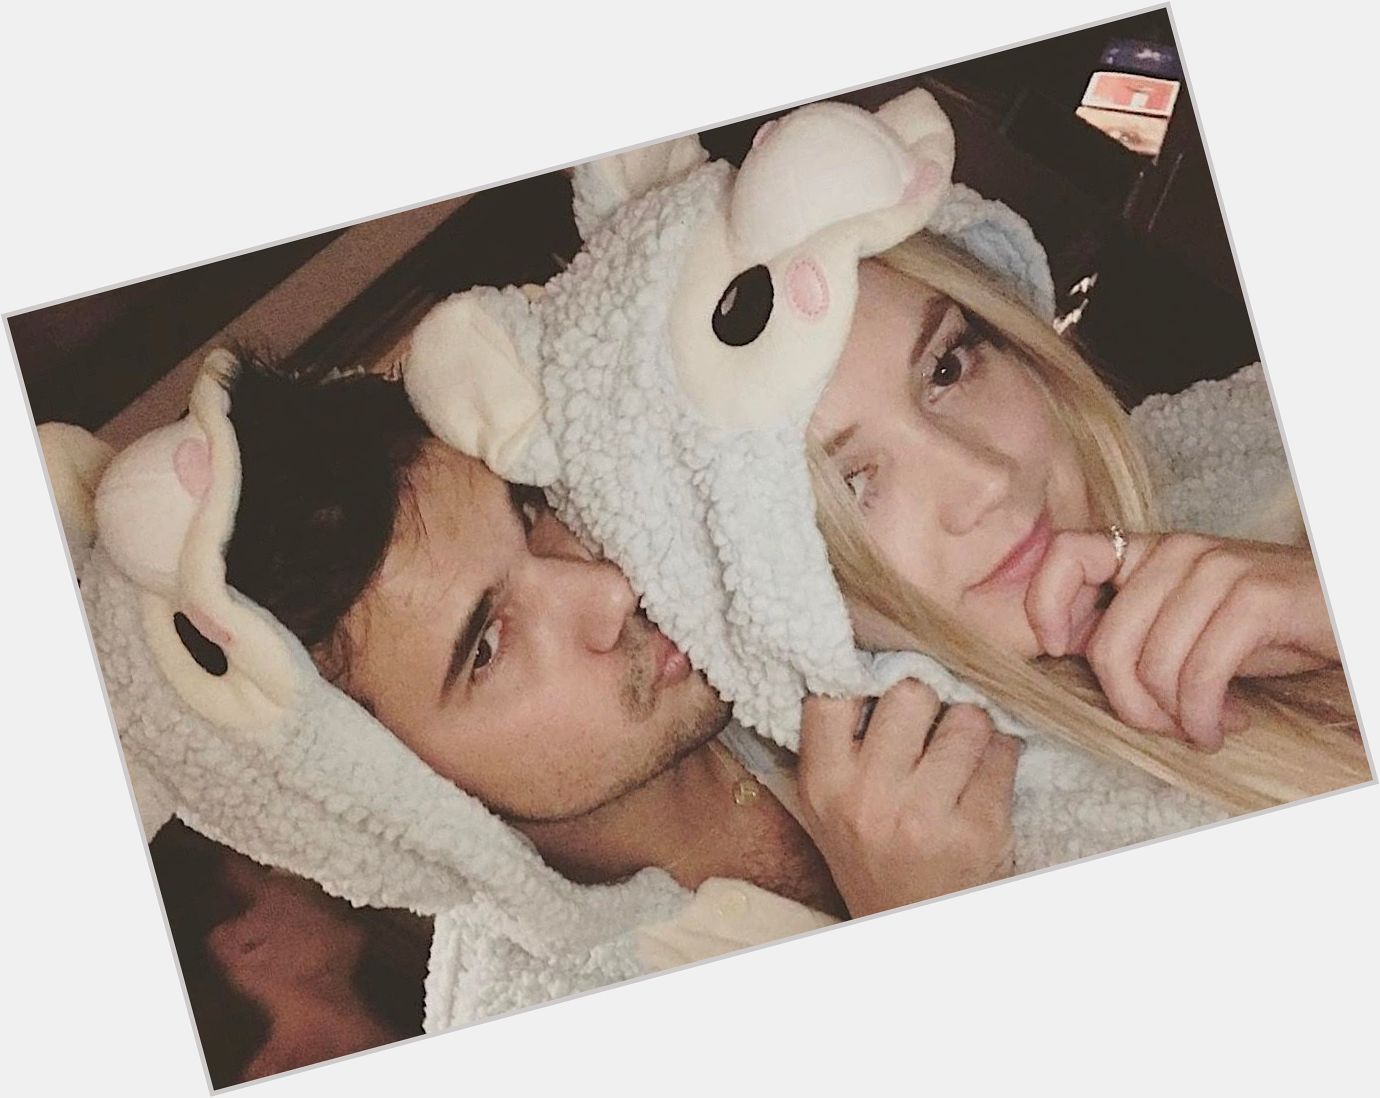 Billie Lourd and Taylor Lautner wear matching onesies as she wishes him a happy birthday -  